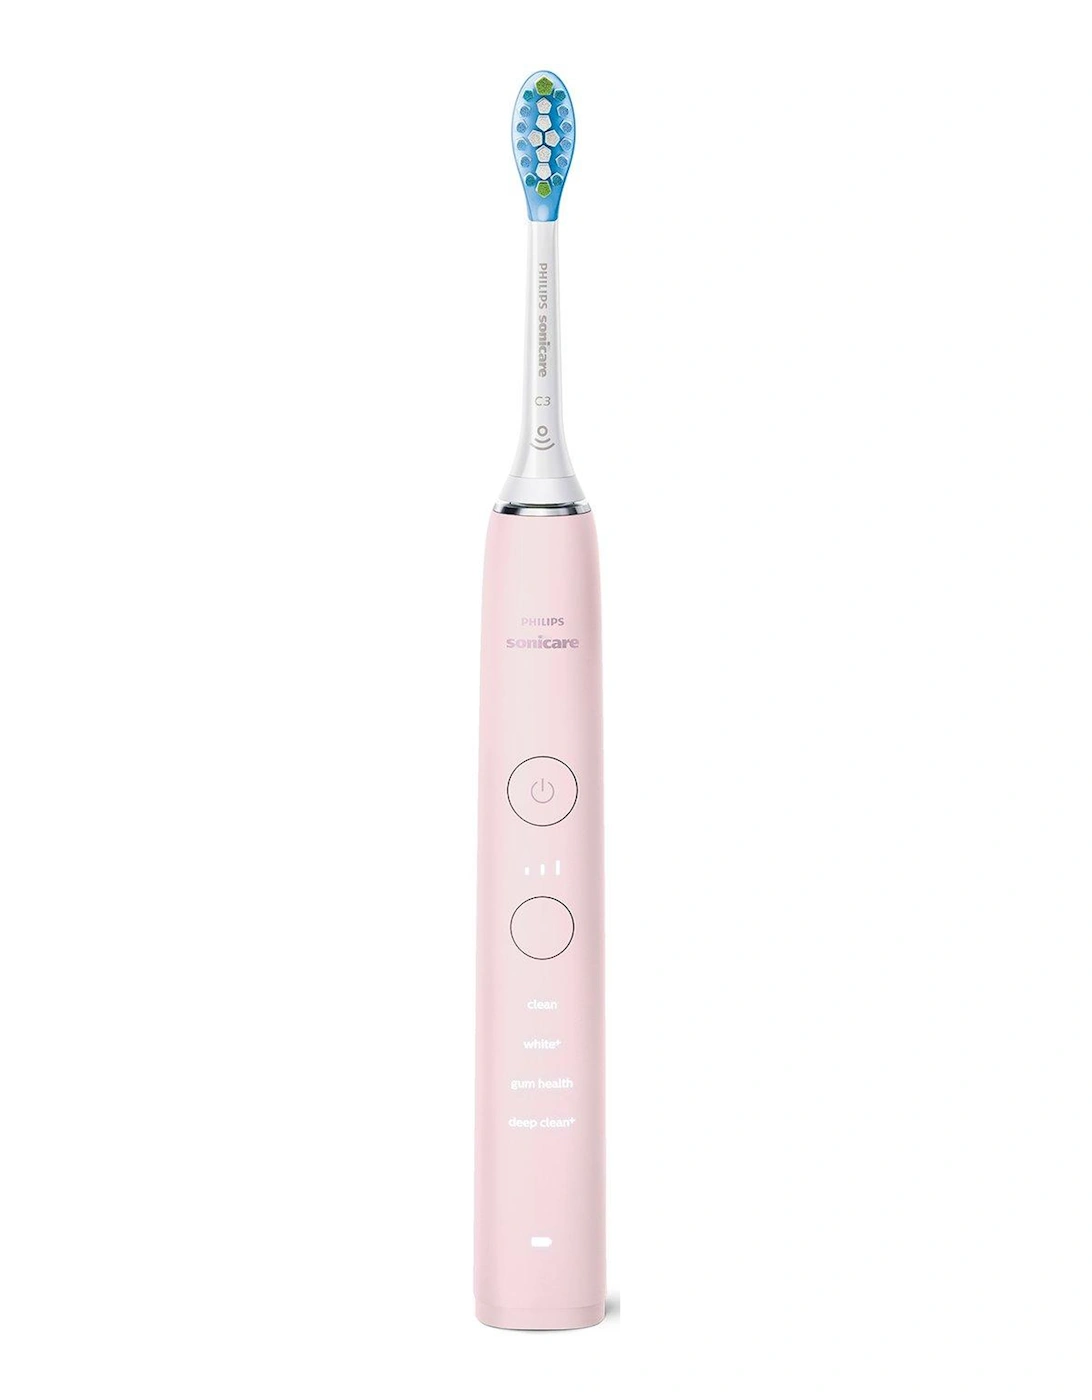 Sonicare DiamondClean 9000 Electric Toothbrush with App, HX9911/53 - Pink